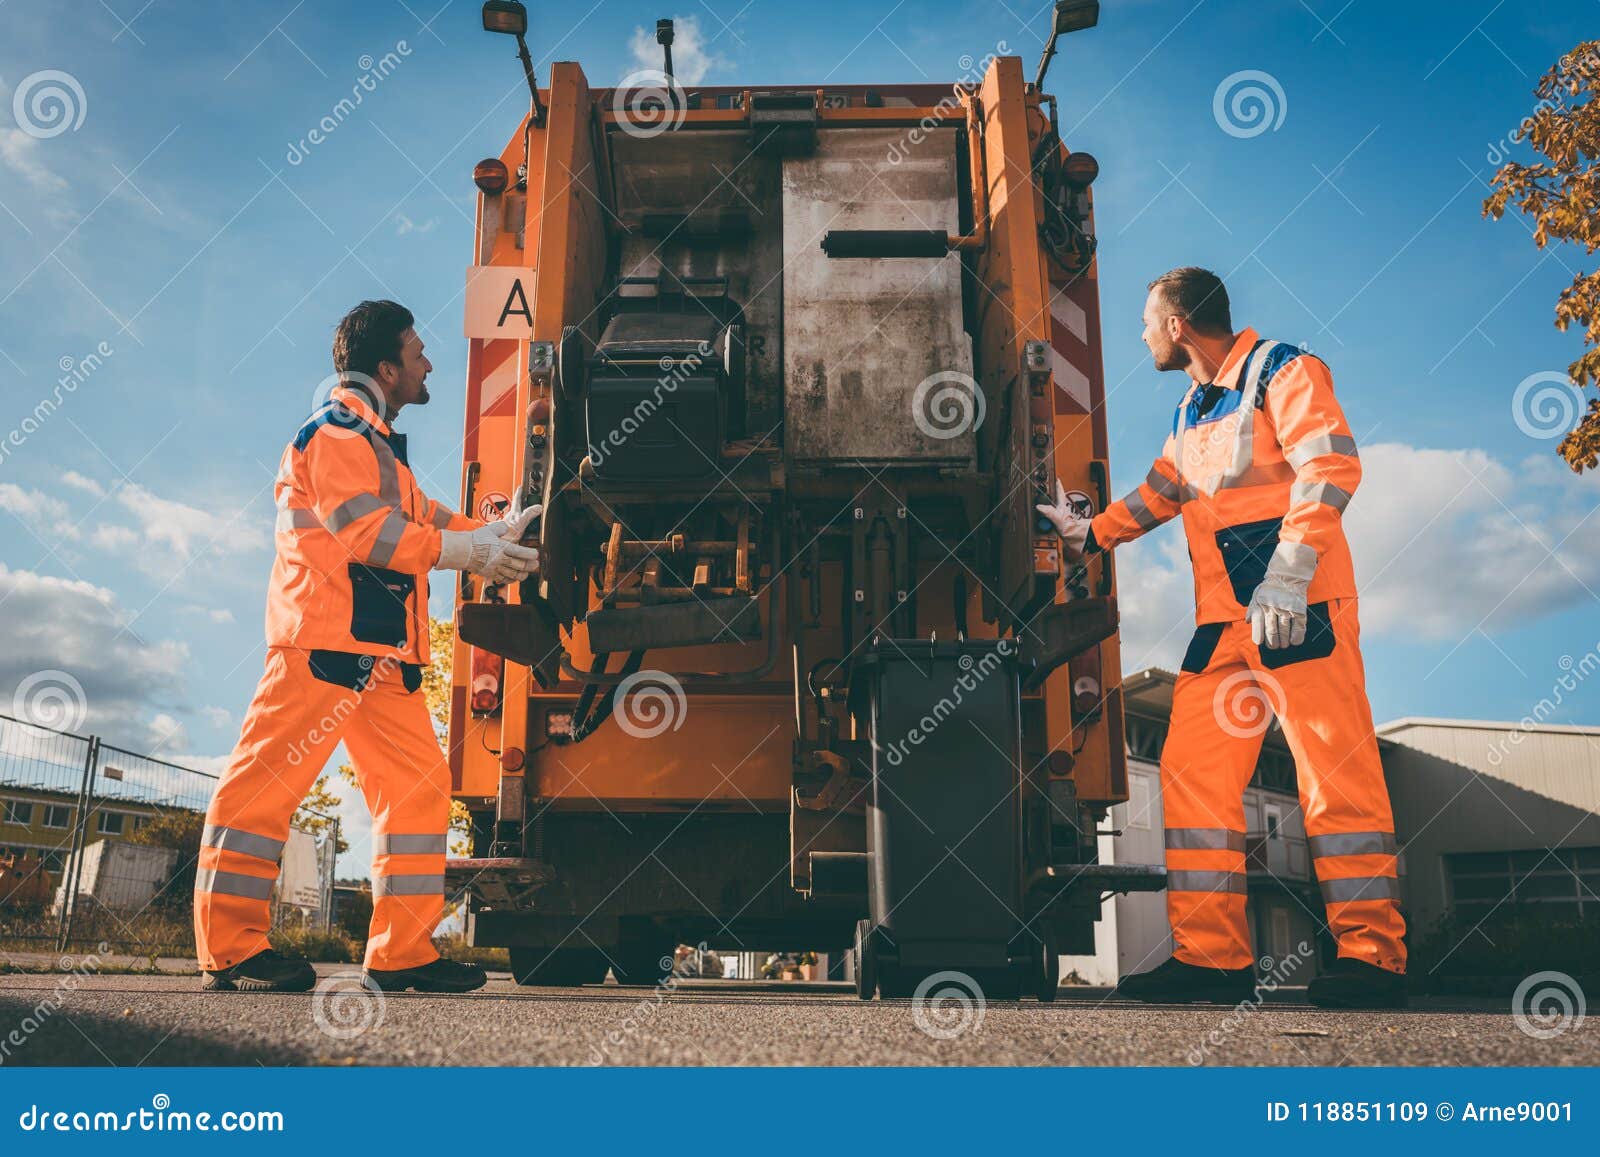 two refuse collection workers loading garbage into waste truck